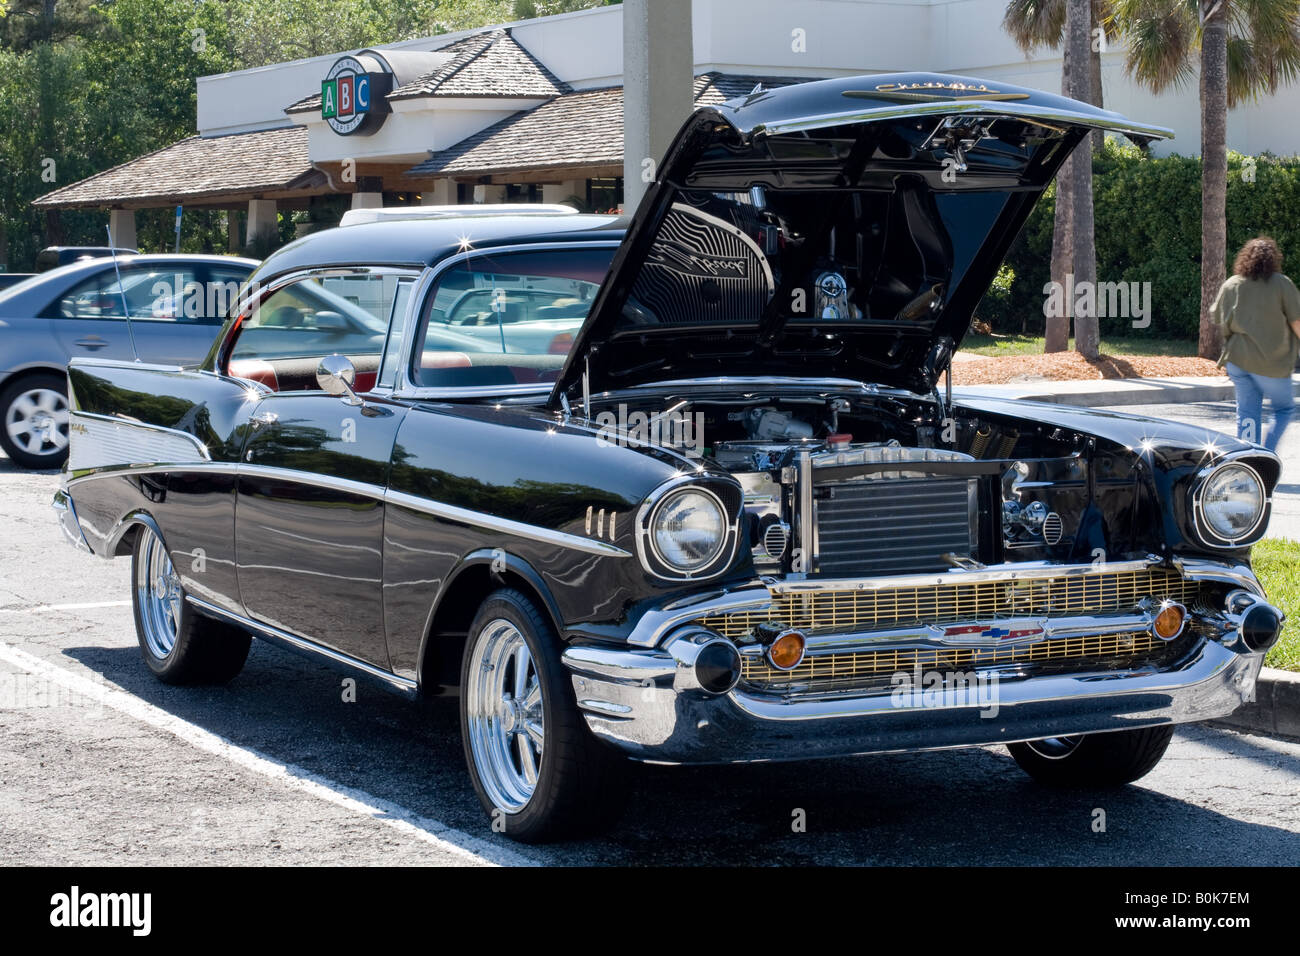 1957 Chevrolet coupe automobile with hood lifted to expose the engine at an auto show in Ponte Vedra Beach, Florida Stock Photo